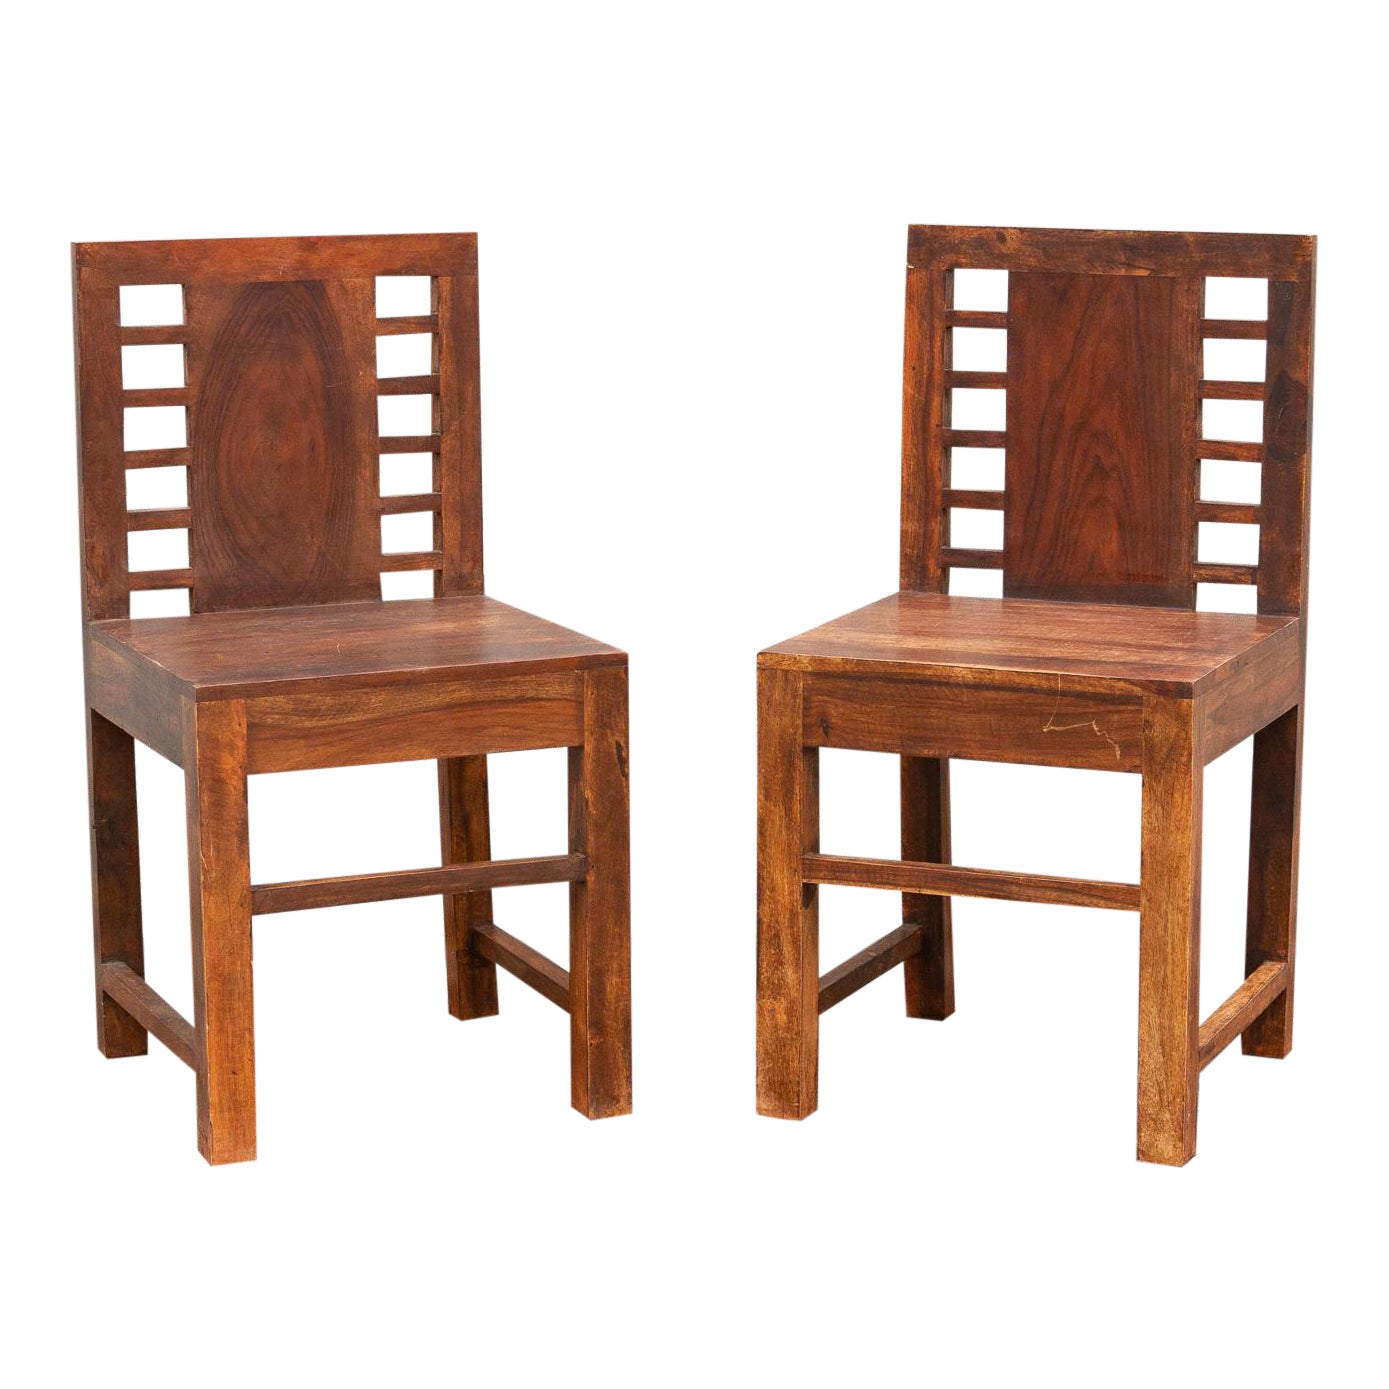 Indian Rustic Colonial Chairs , set of 2~P77630488